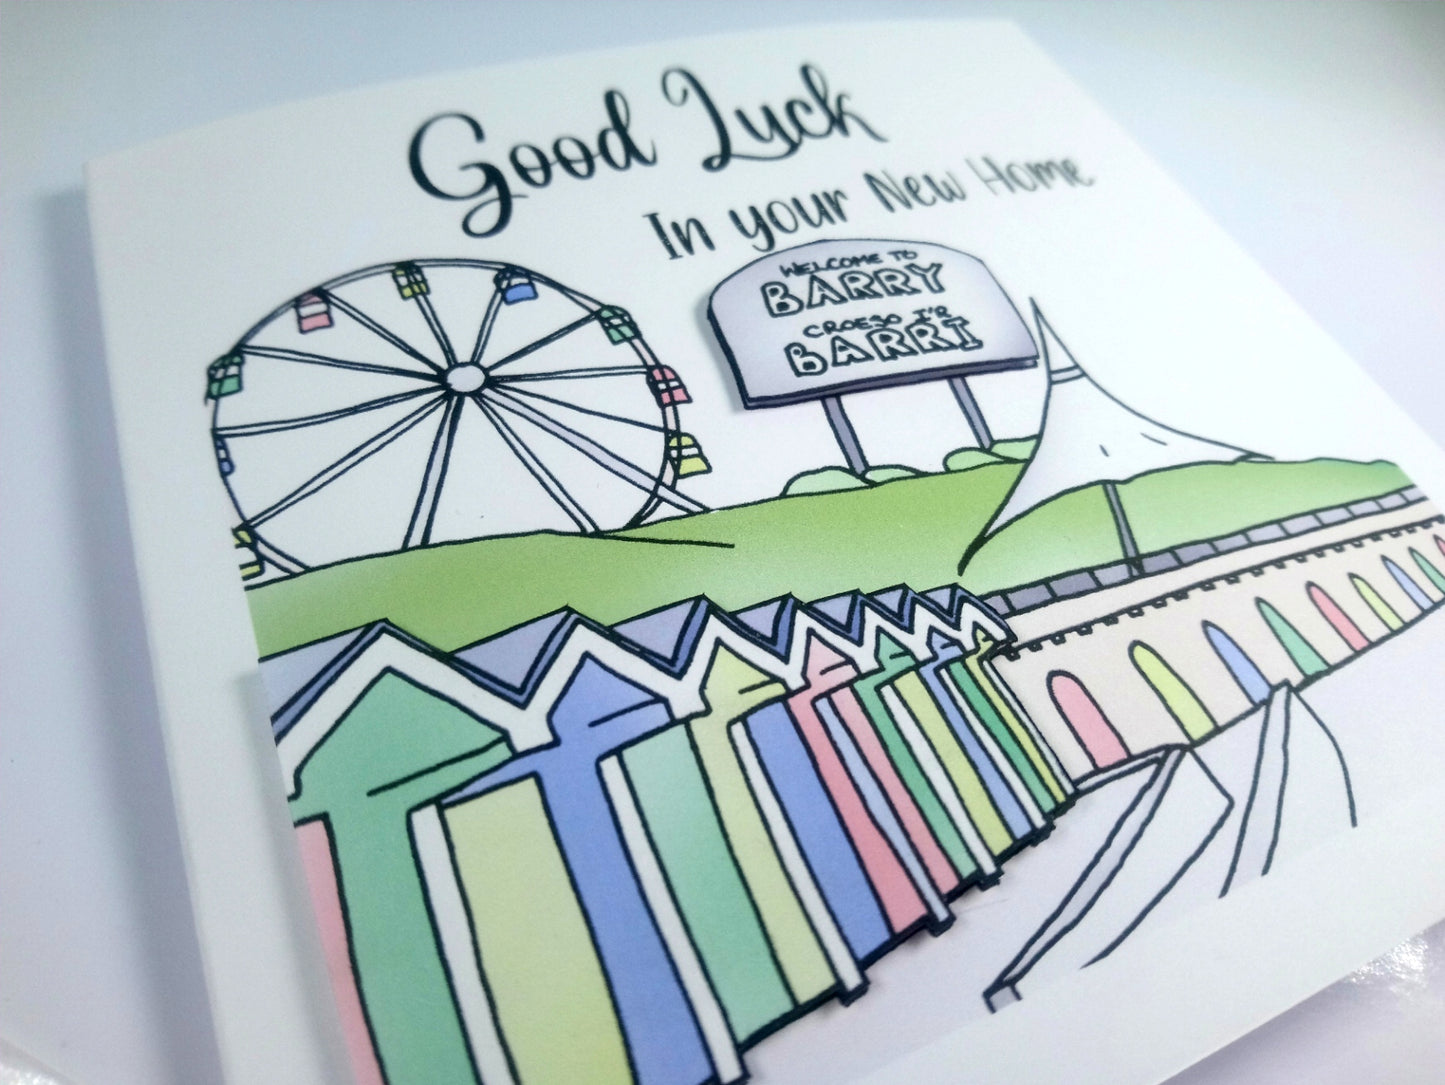 Good luck in your New home Barry Card